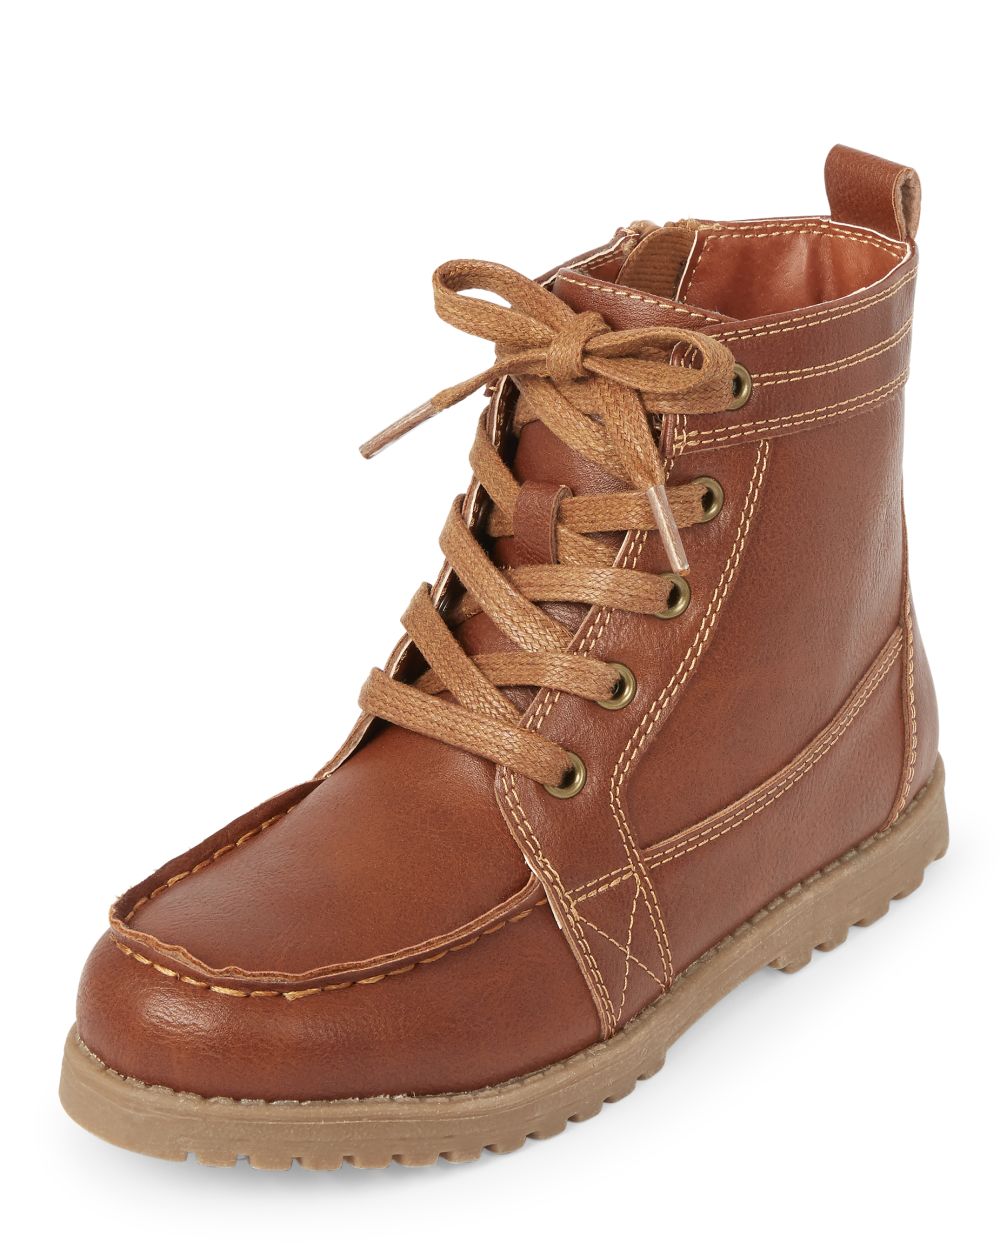 

Boys Boys Lace Up Boots - Tan - The Children's Place